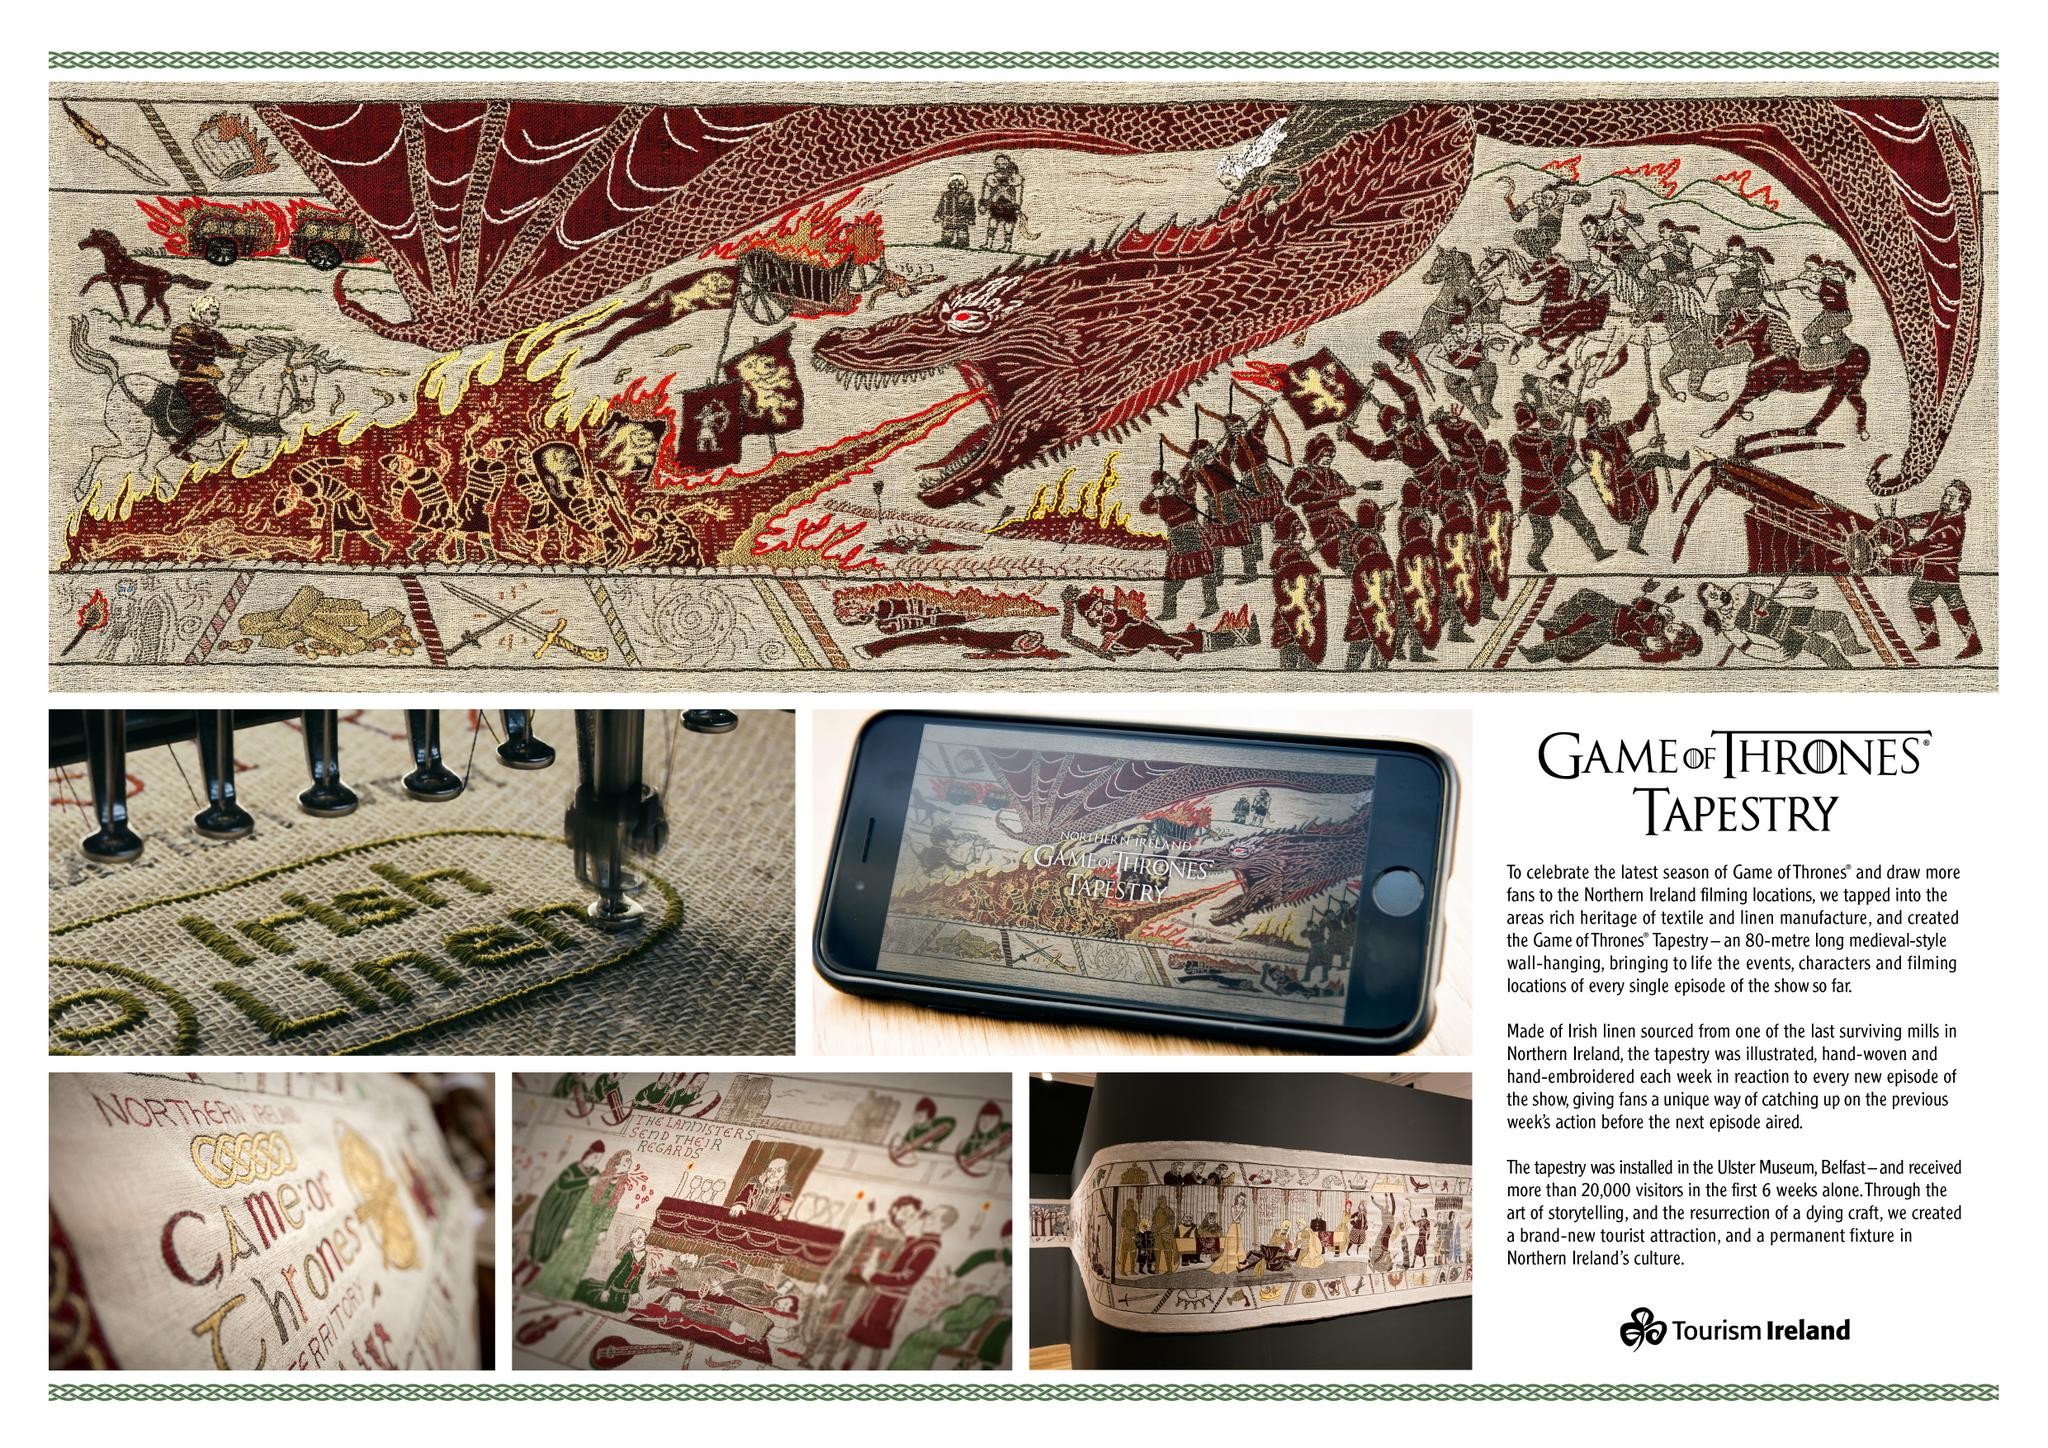 Game of Thrones "Tapestry"